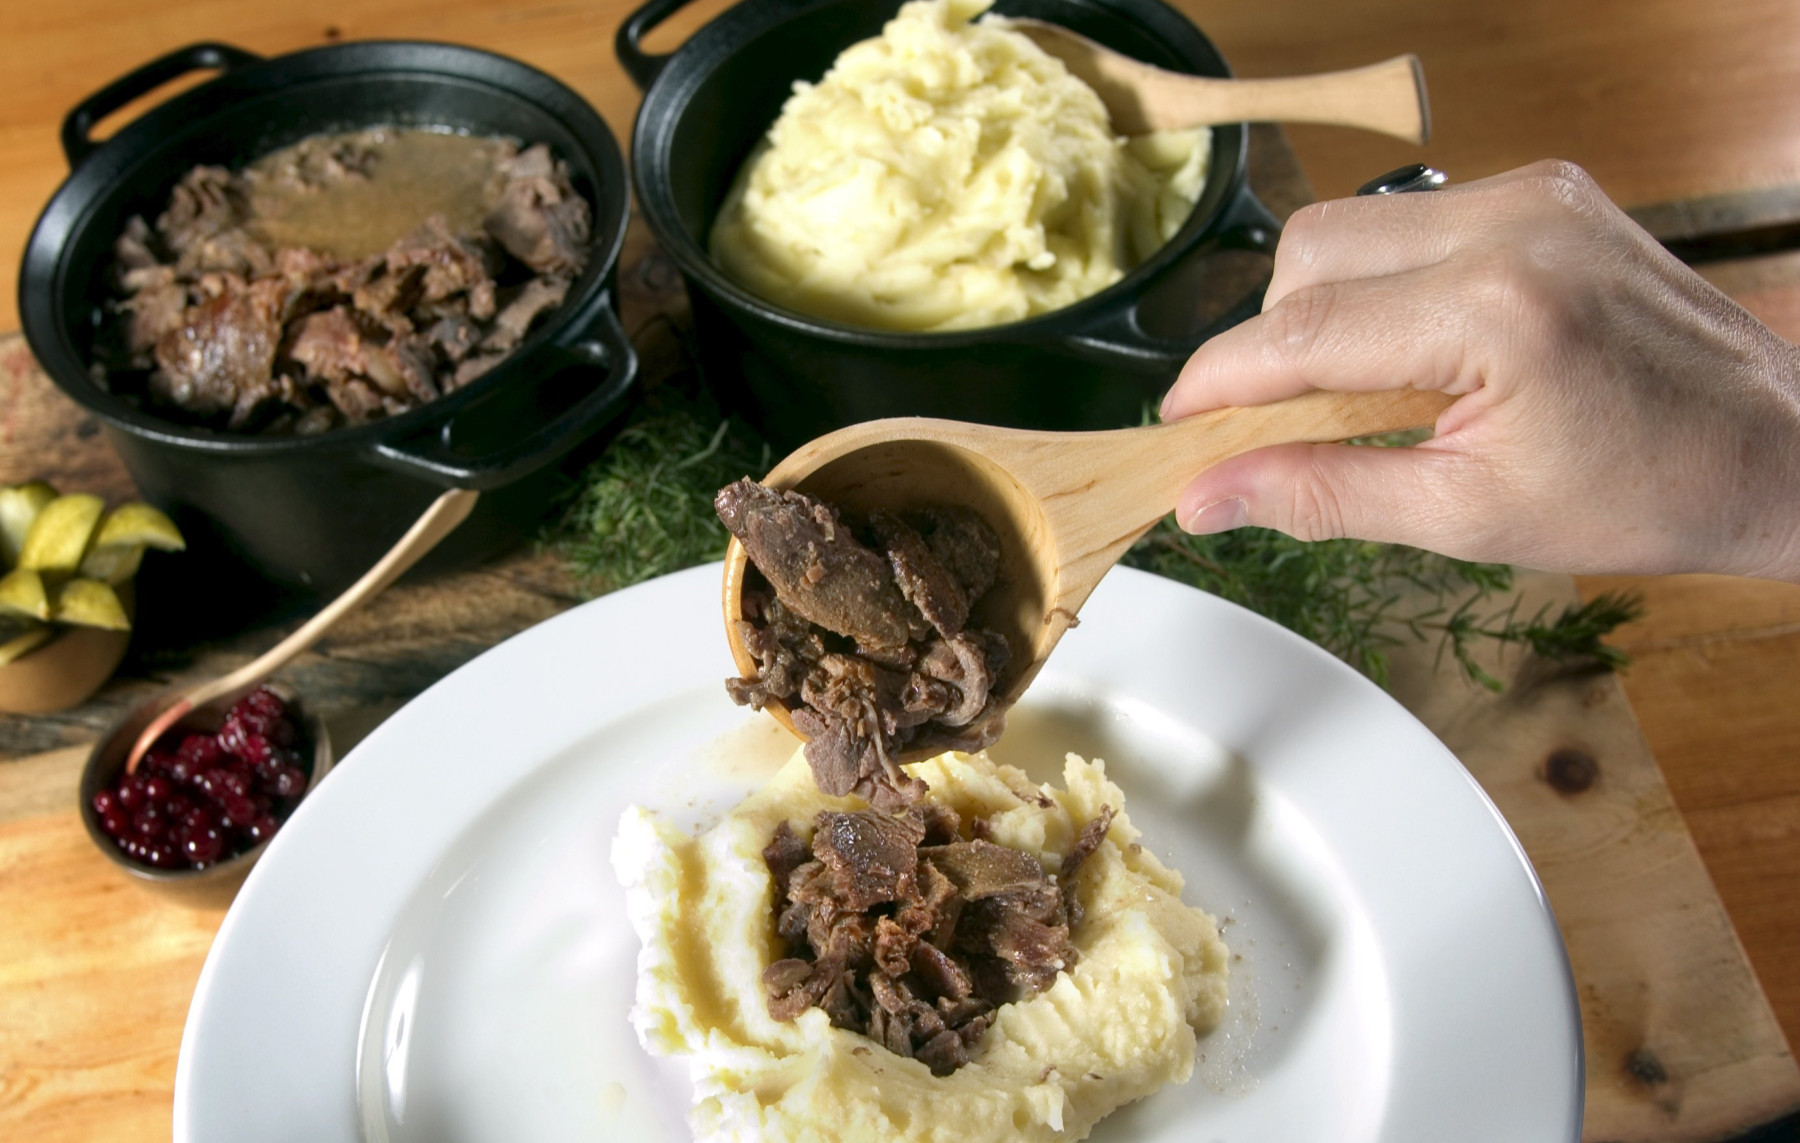 A hand spoons pieces of reindeer meat onto a plate of mashed potatoes.